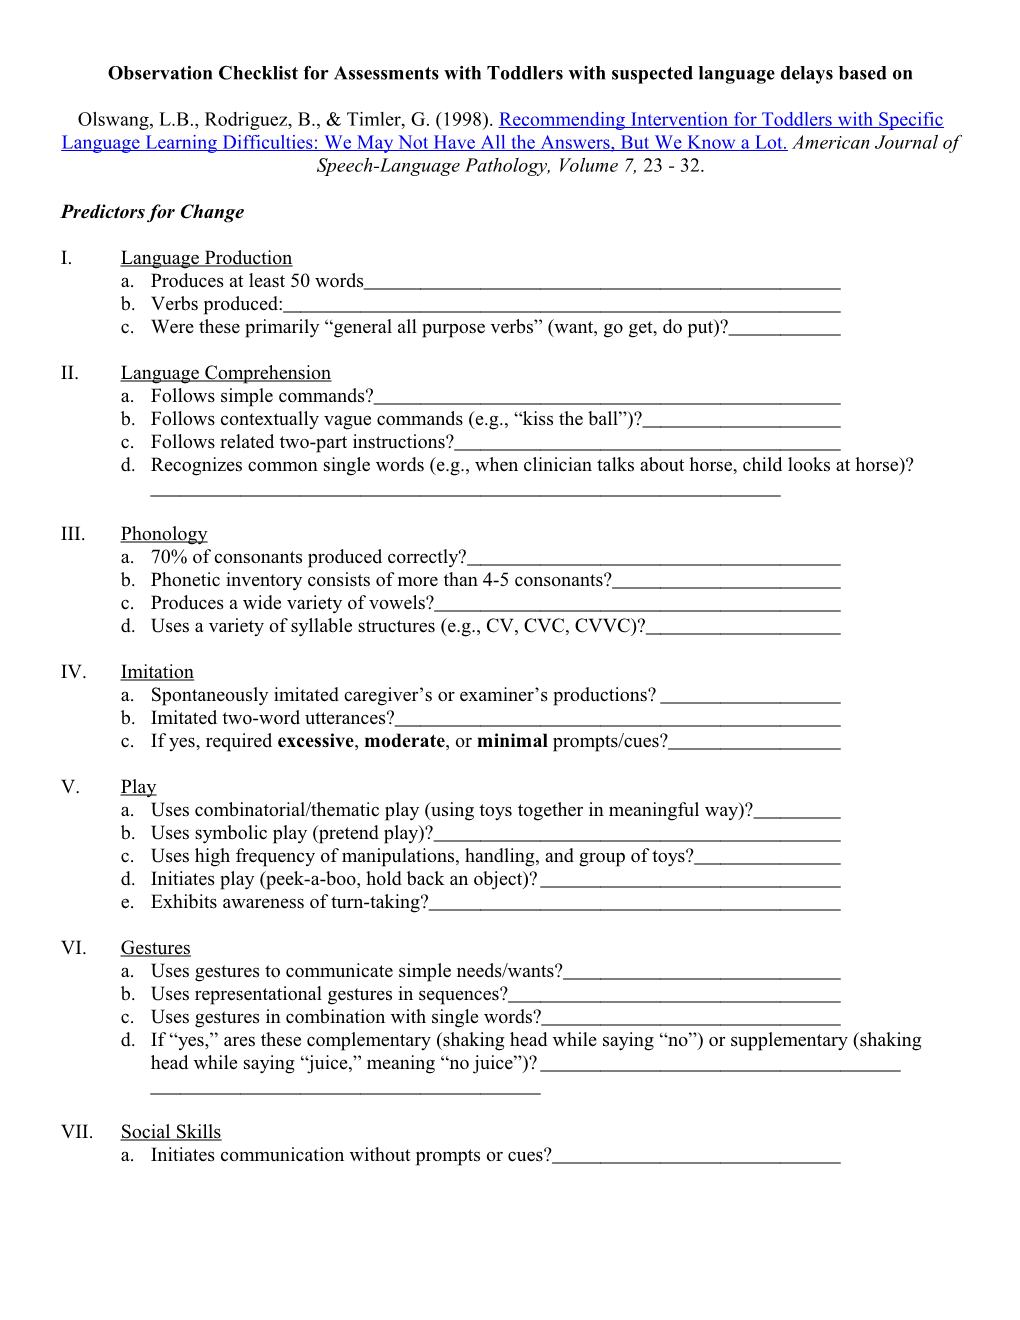 Observation Checklist for Assessments with Toddlers with Suspected Language Delays Based On